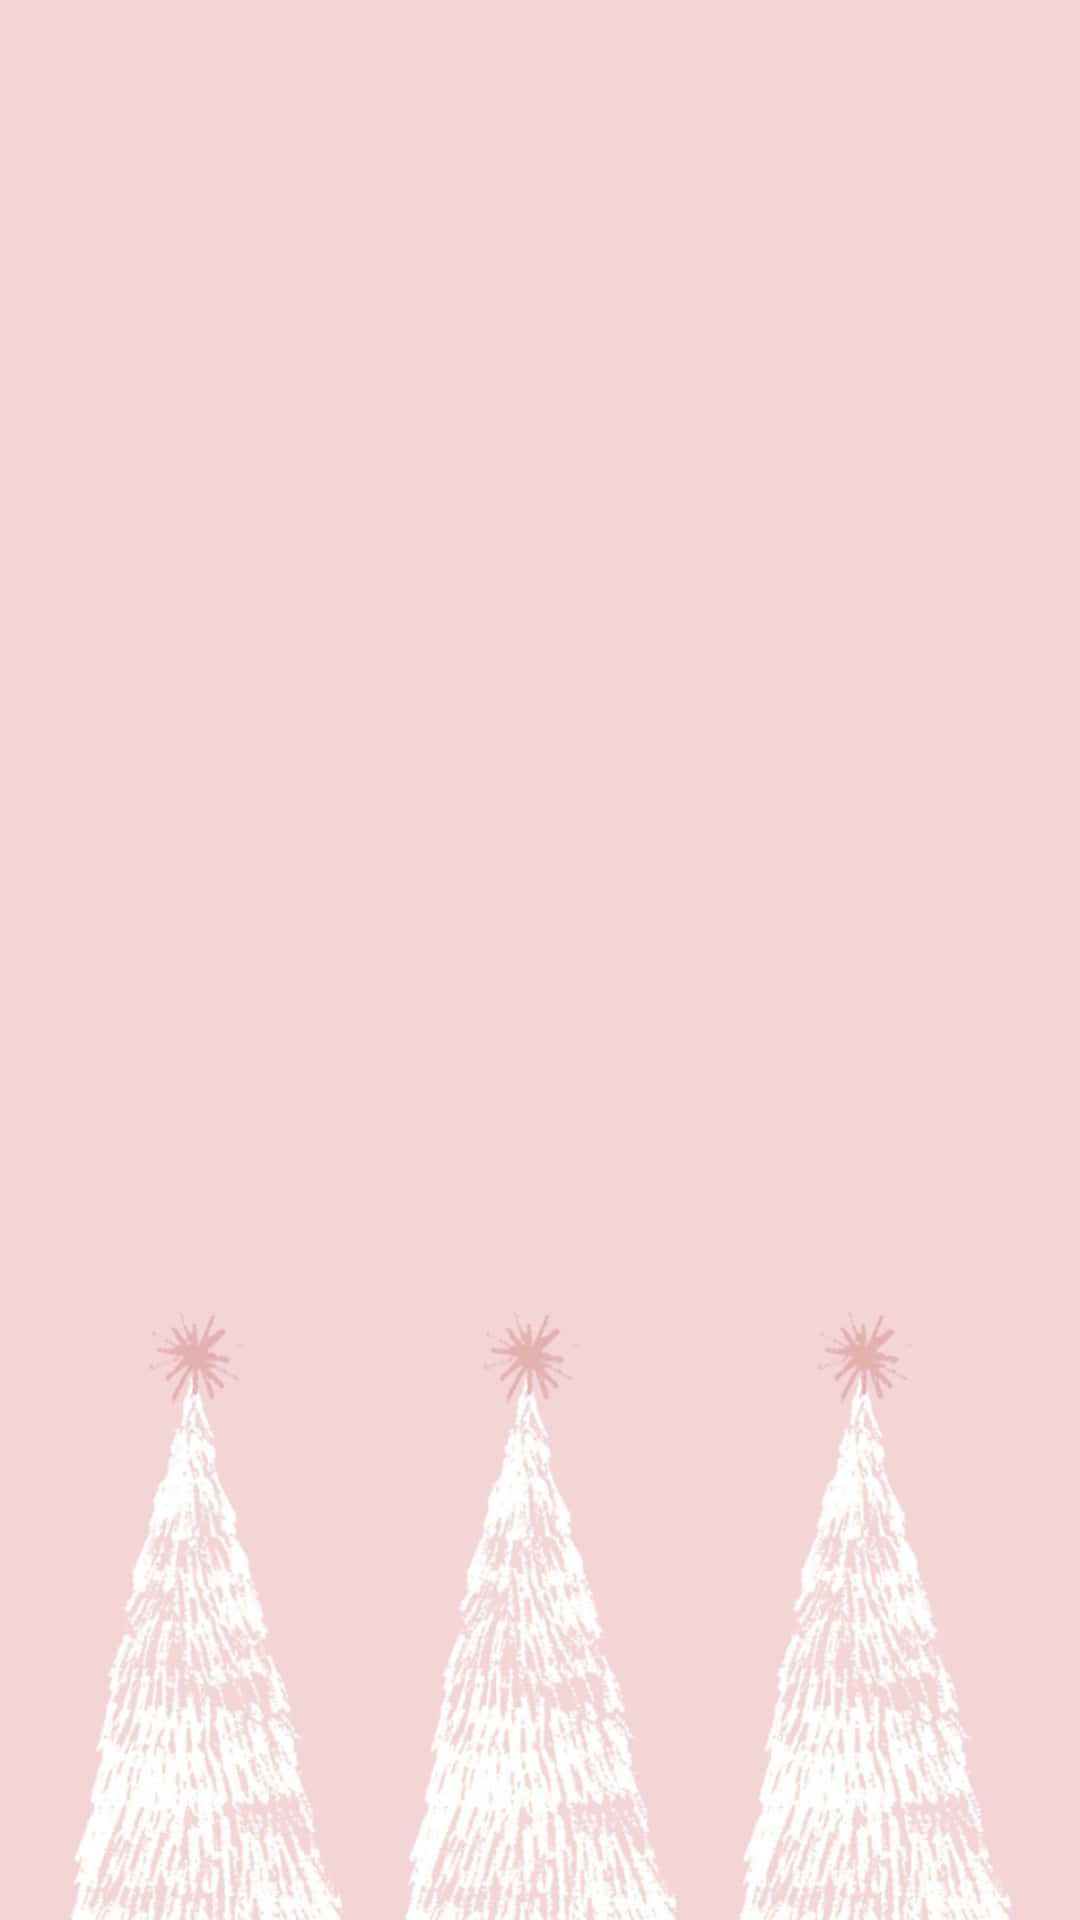 Celebrate the Holidays With a Beautiful Pink Christmas Tree! Wallpaper